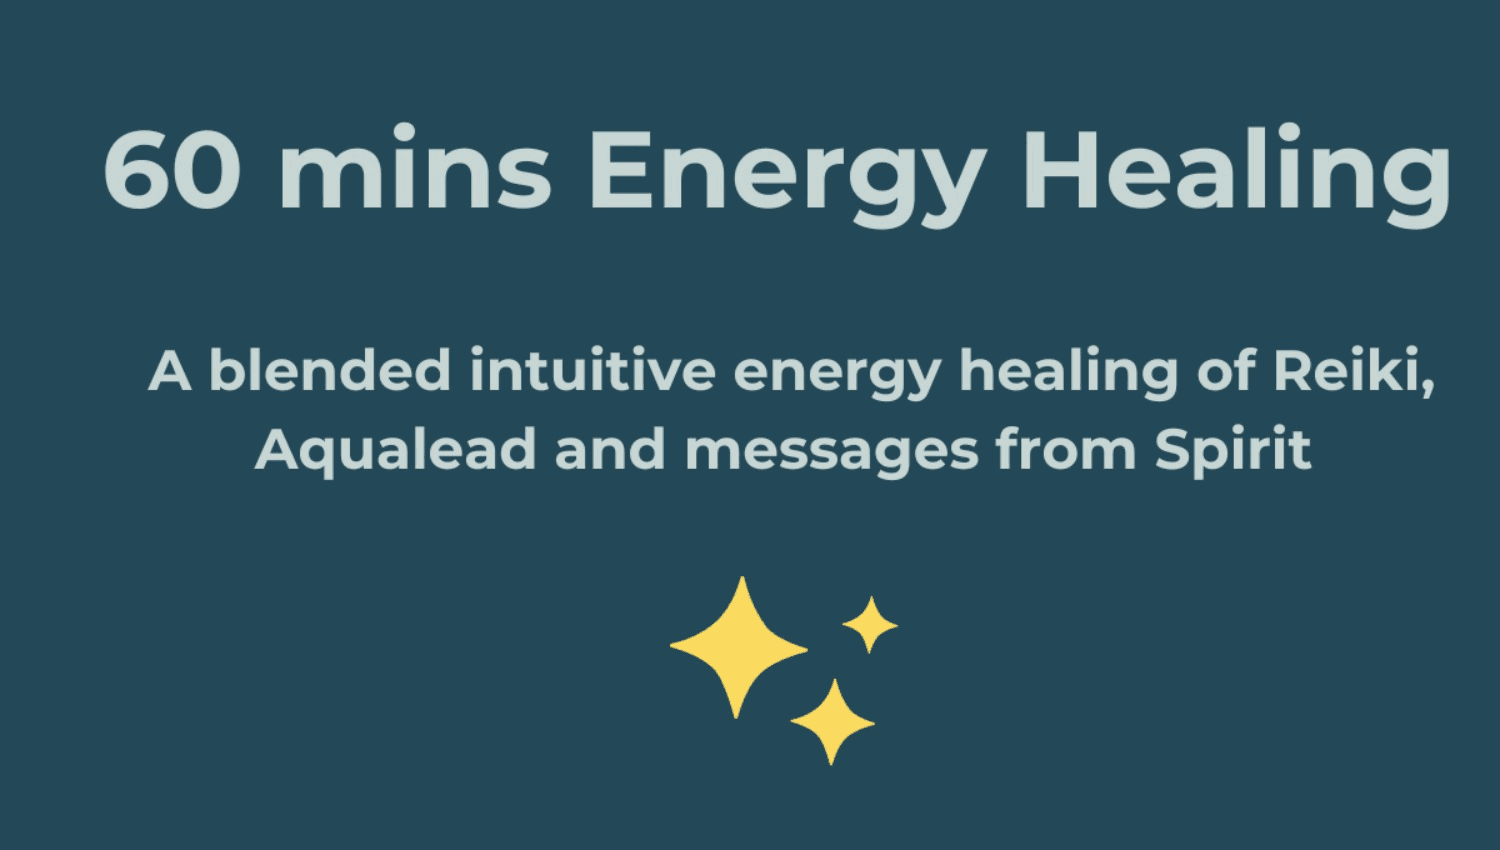 Image for Intuitive Energy Healing - 60 mins